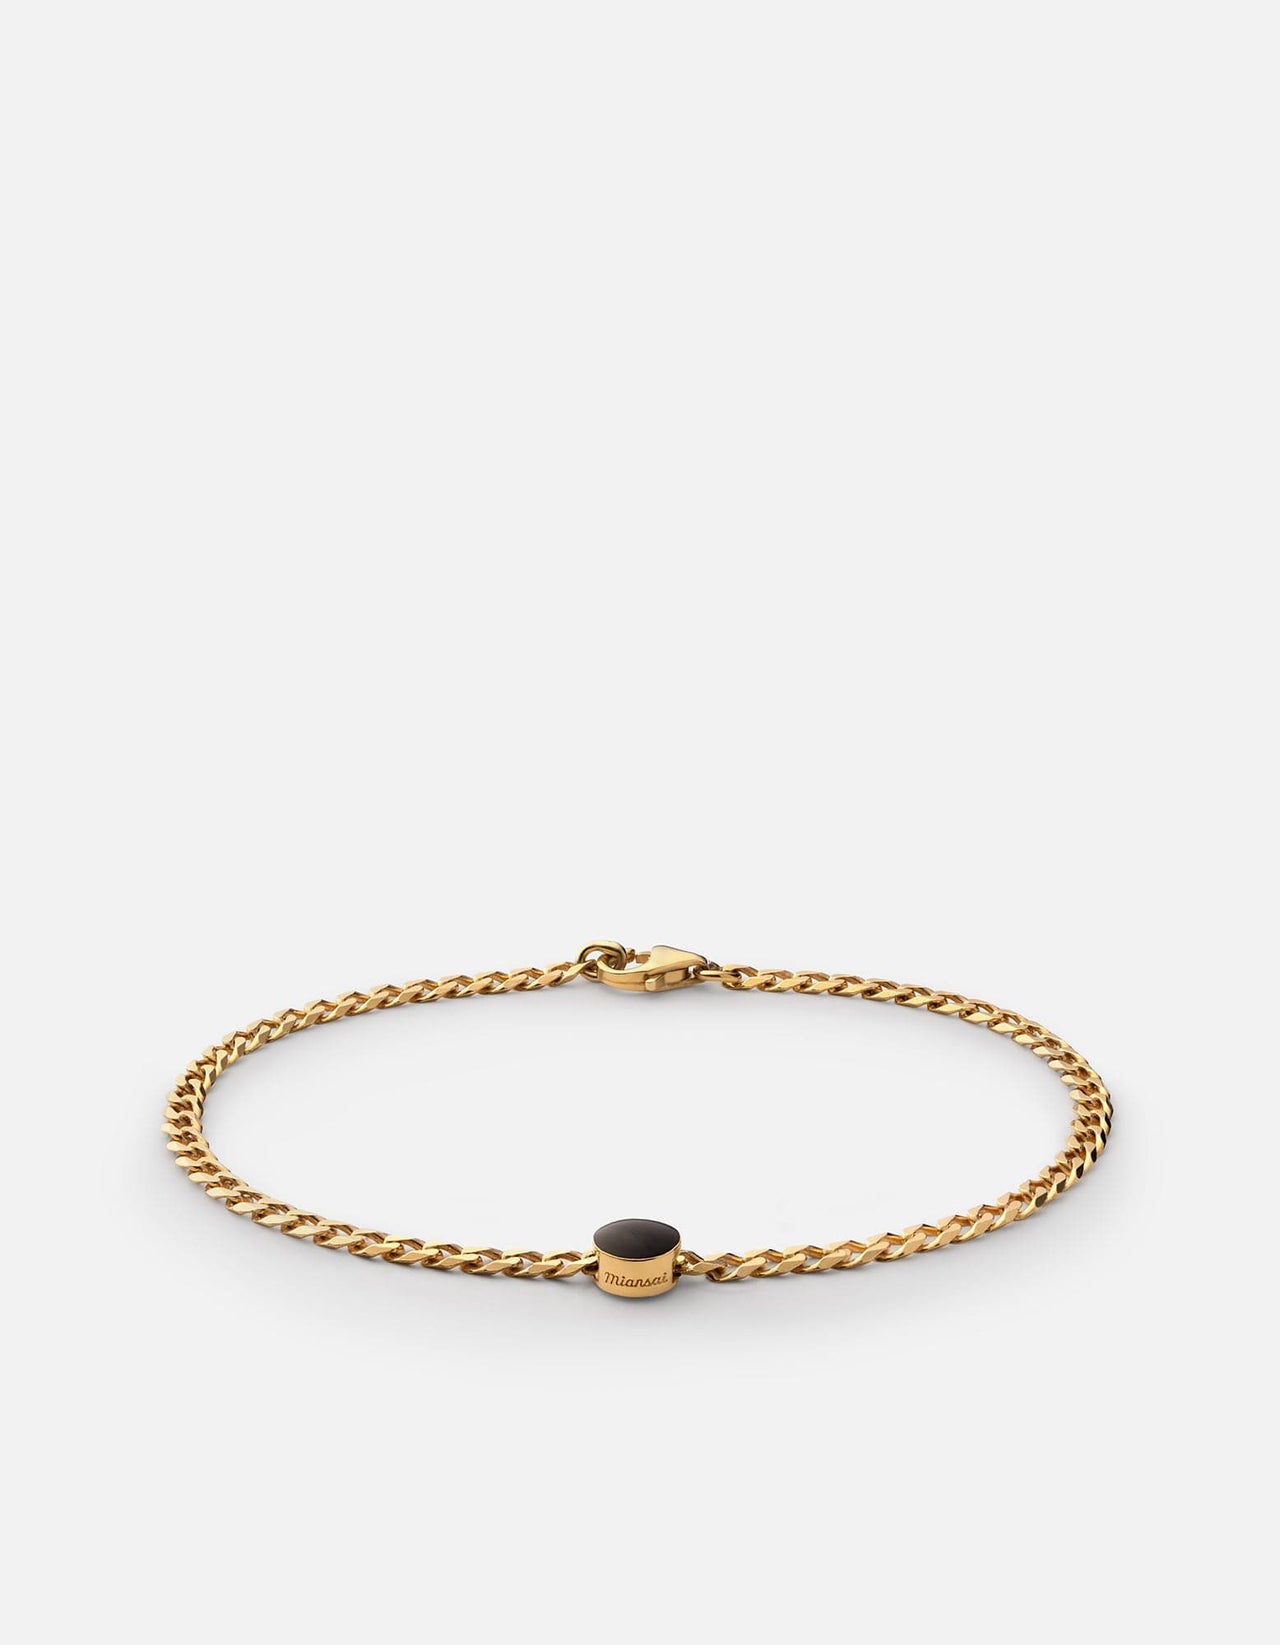 6mm Leaves Chain Gold Plated Bracelet | Gold plated bracelets, Leaf bracelet,  Gold